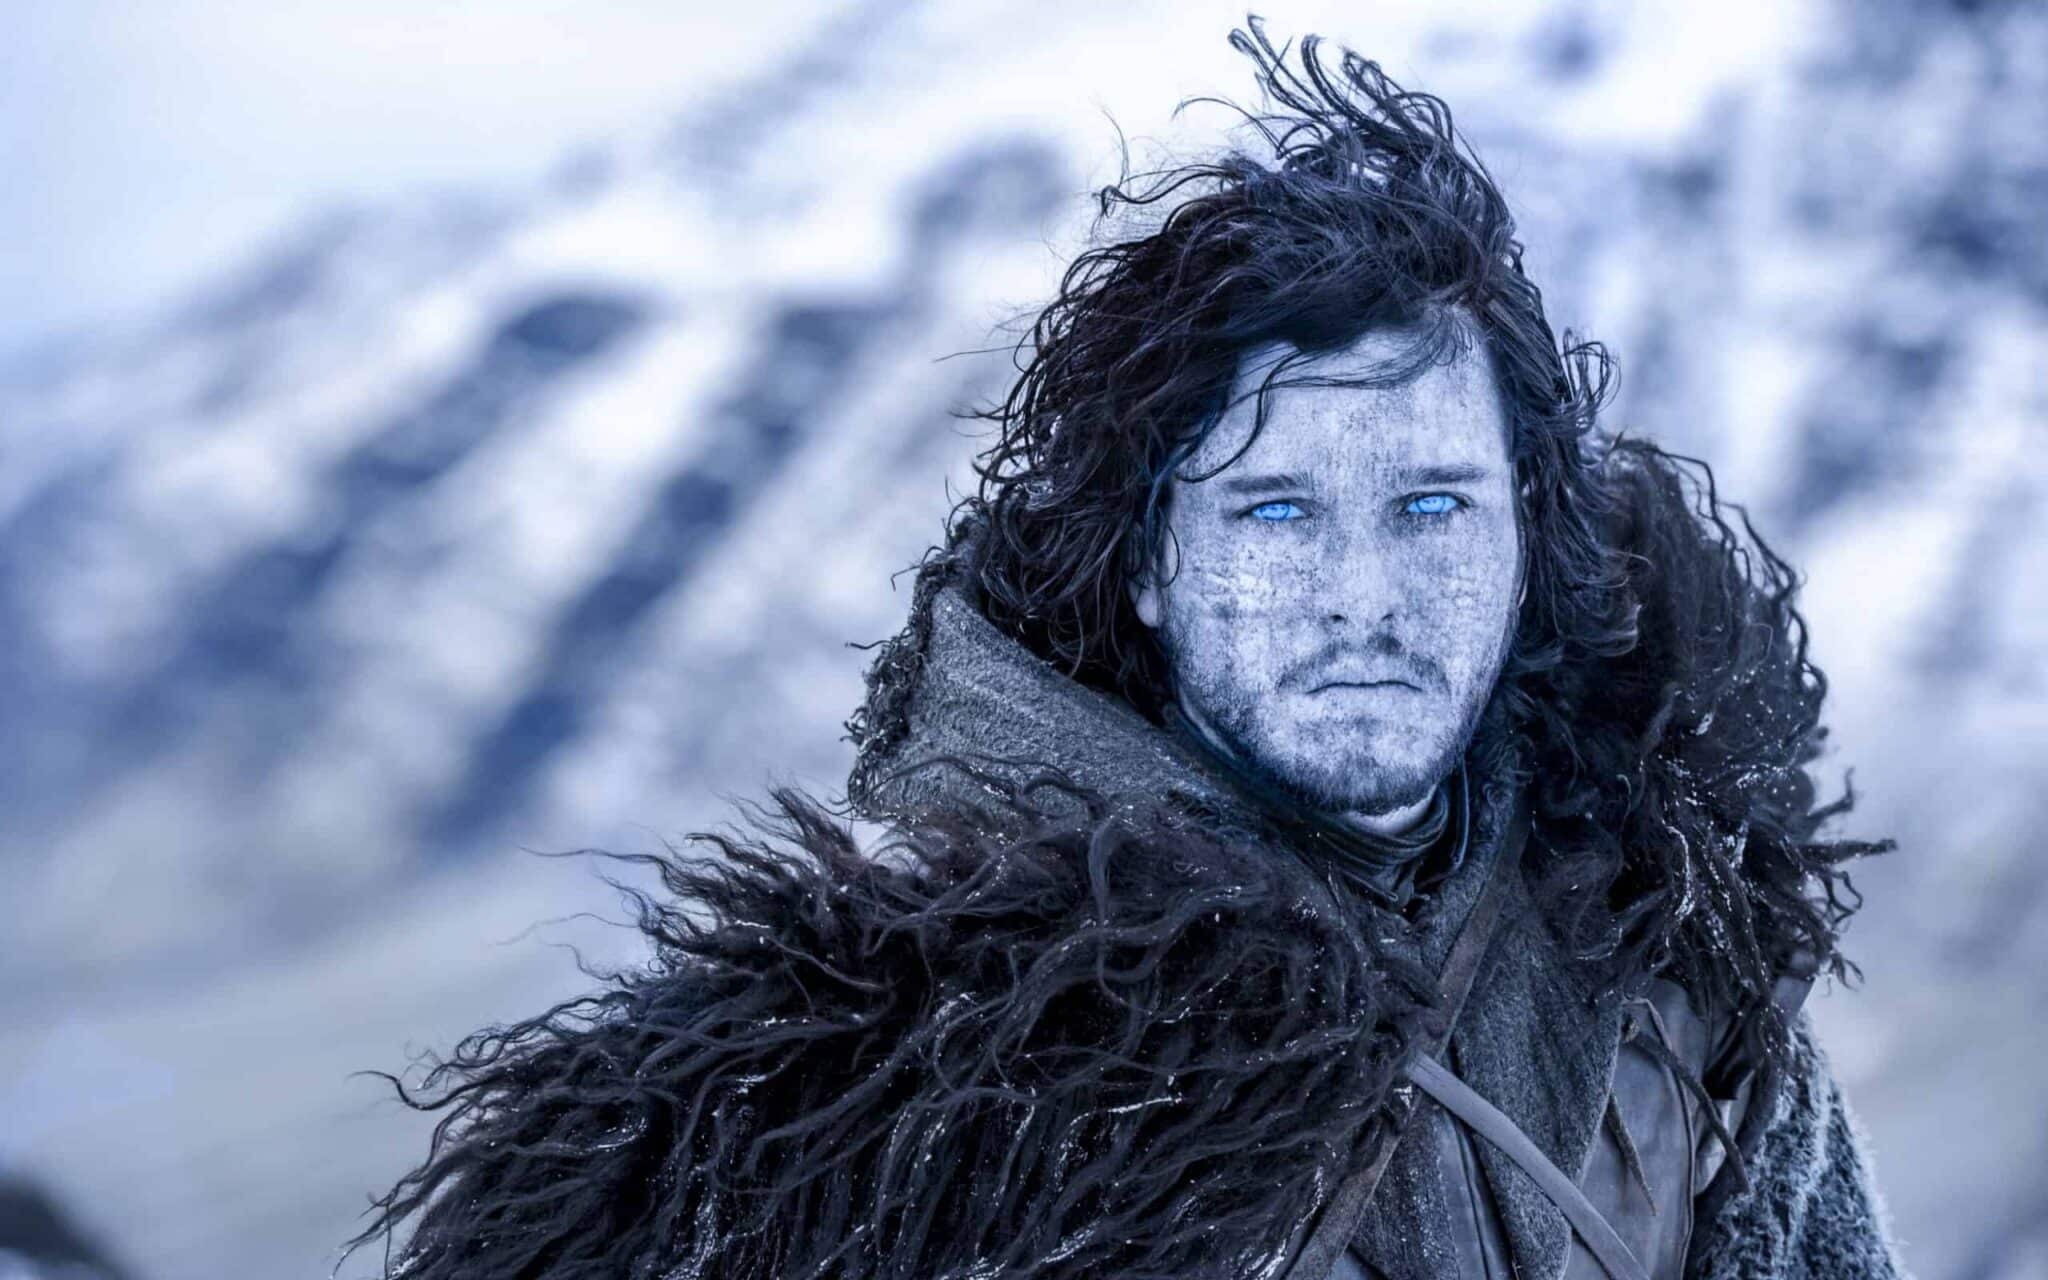 Excited Fans Believe HBO's Jon Snow Series Will Be About Aegon Blackfyre